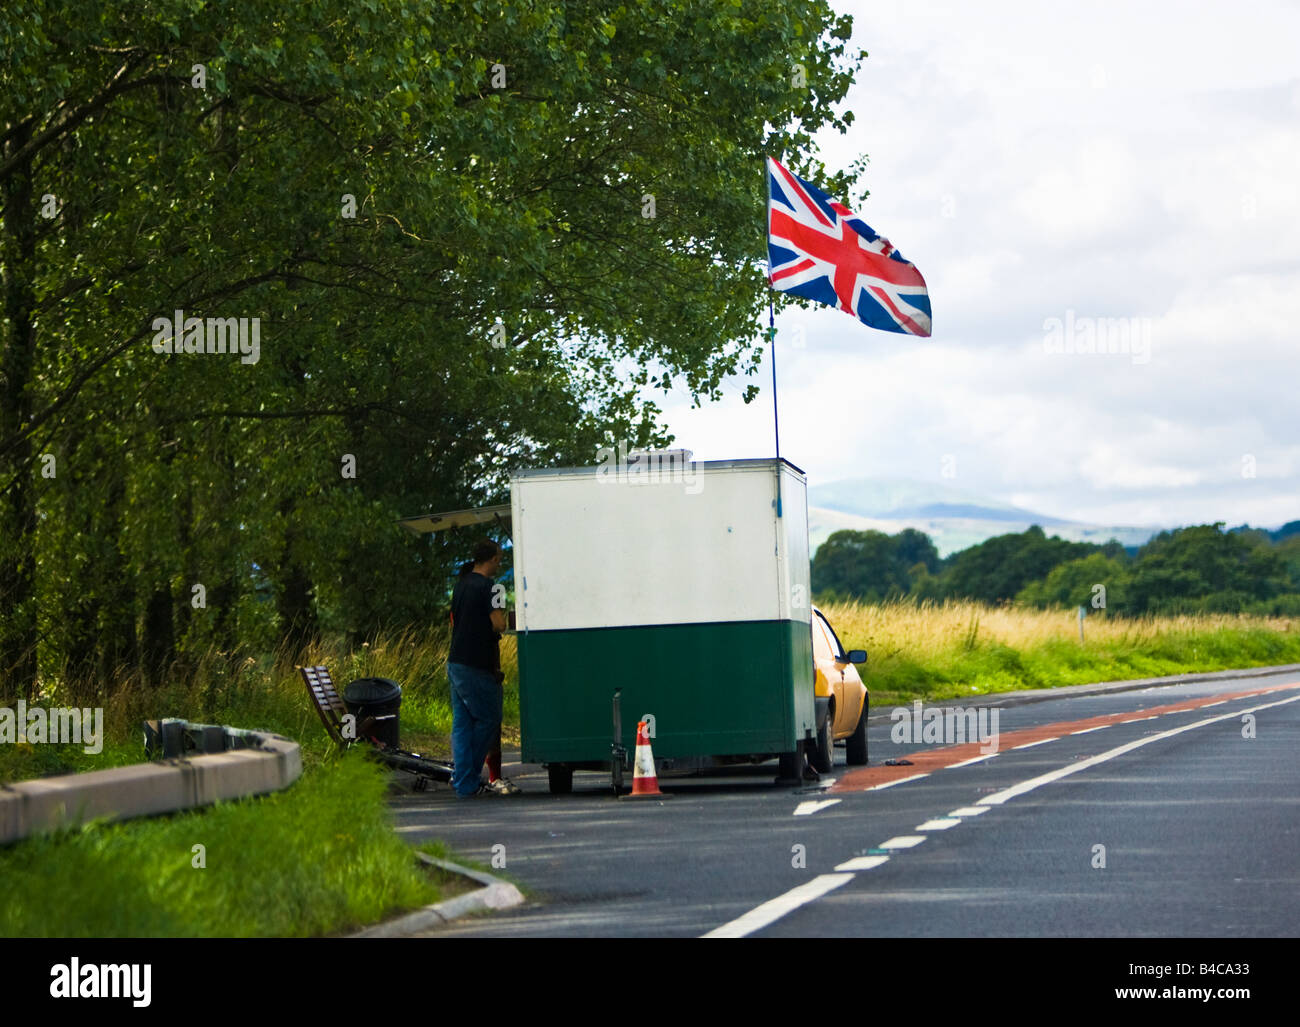 Small roadside cafe parked in a layby on a road in England UK Stock Photo